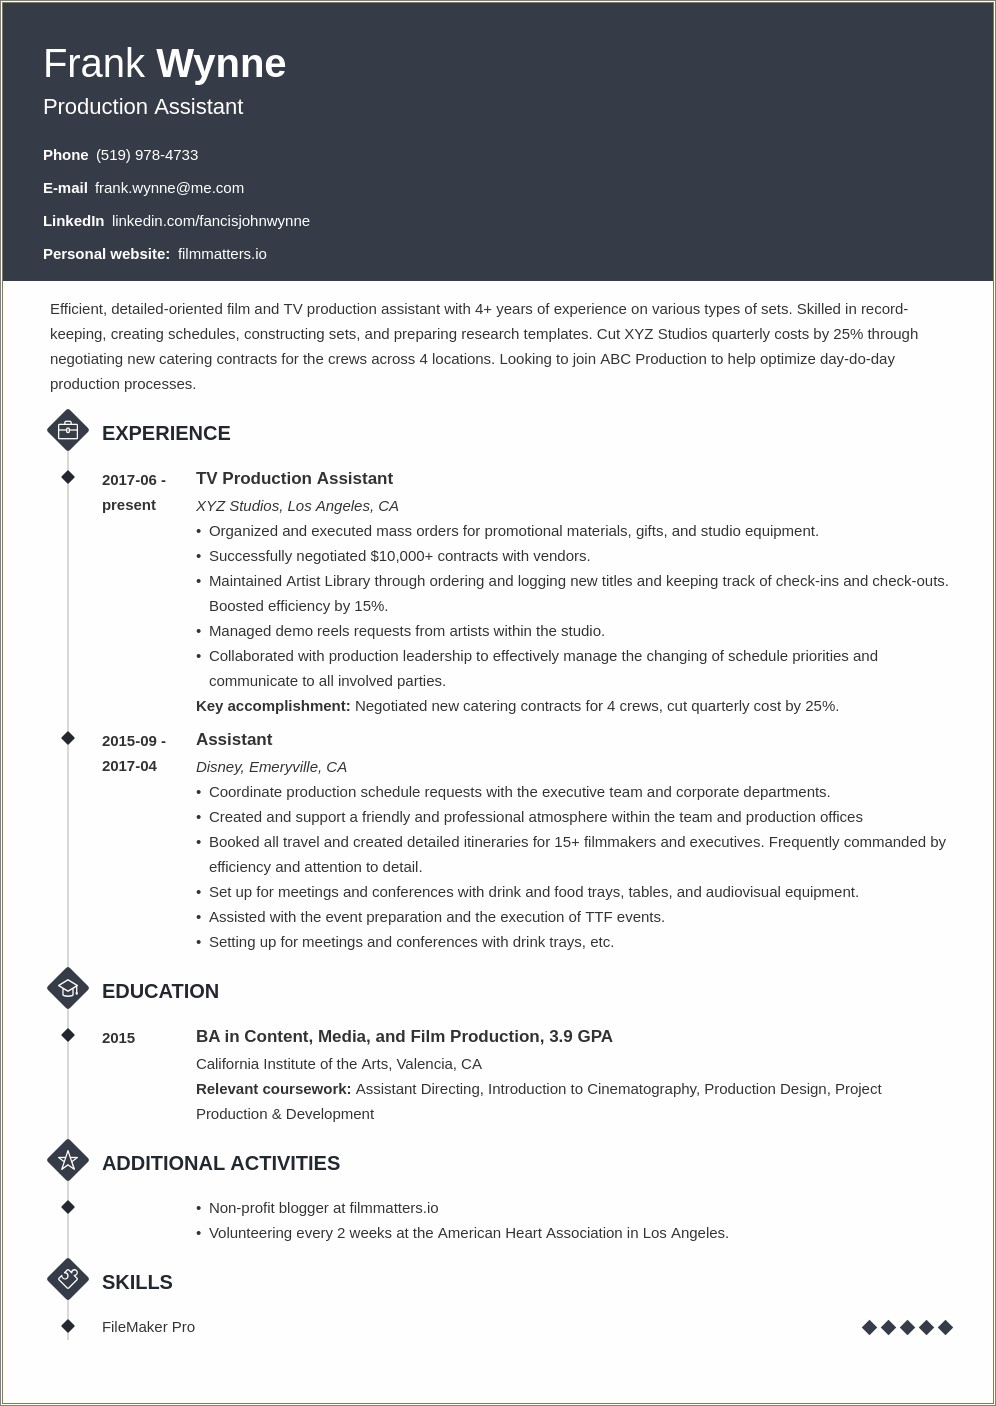 Resume Objective Examples For Production Assistant